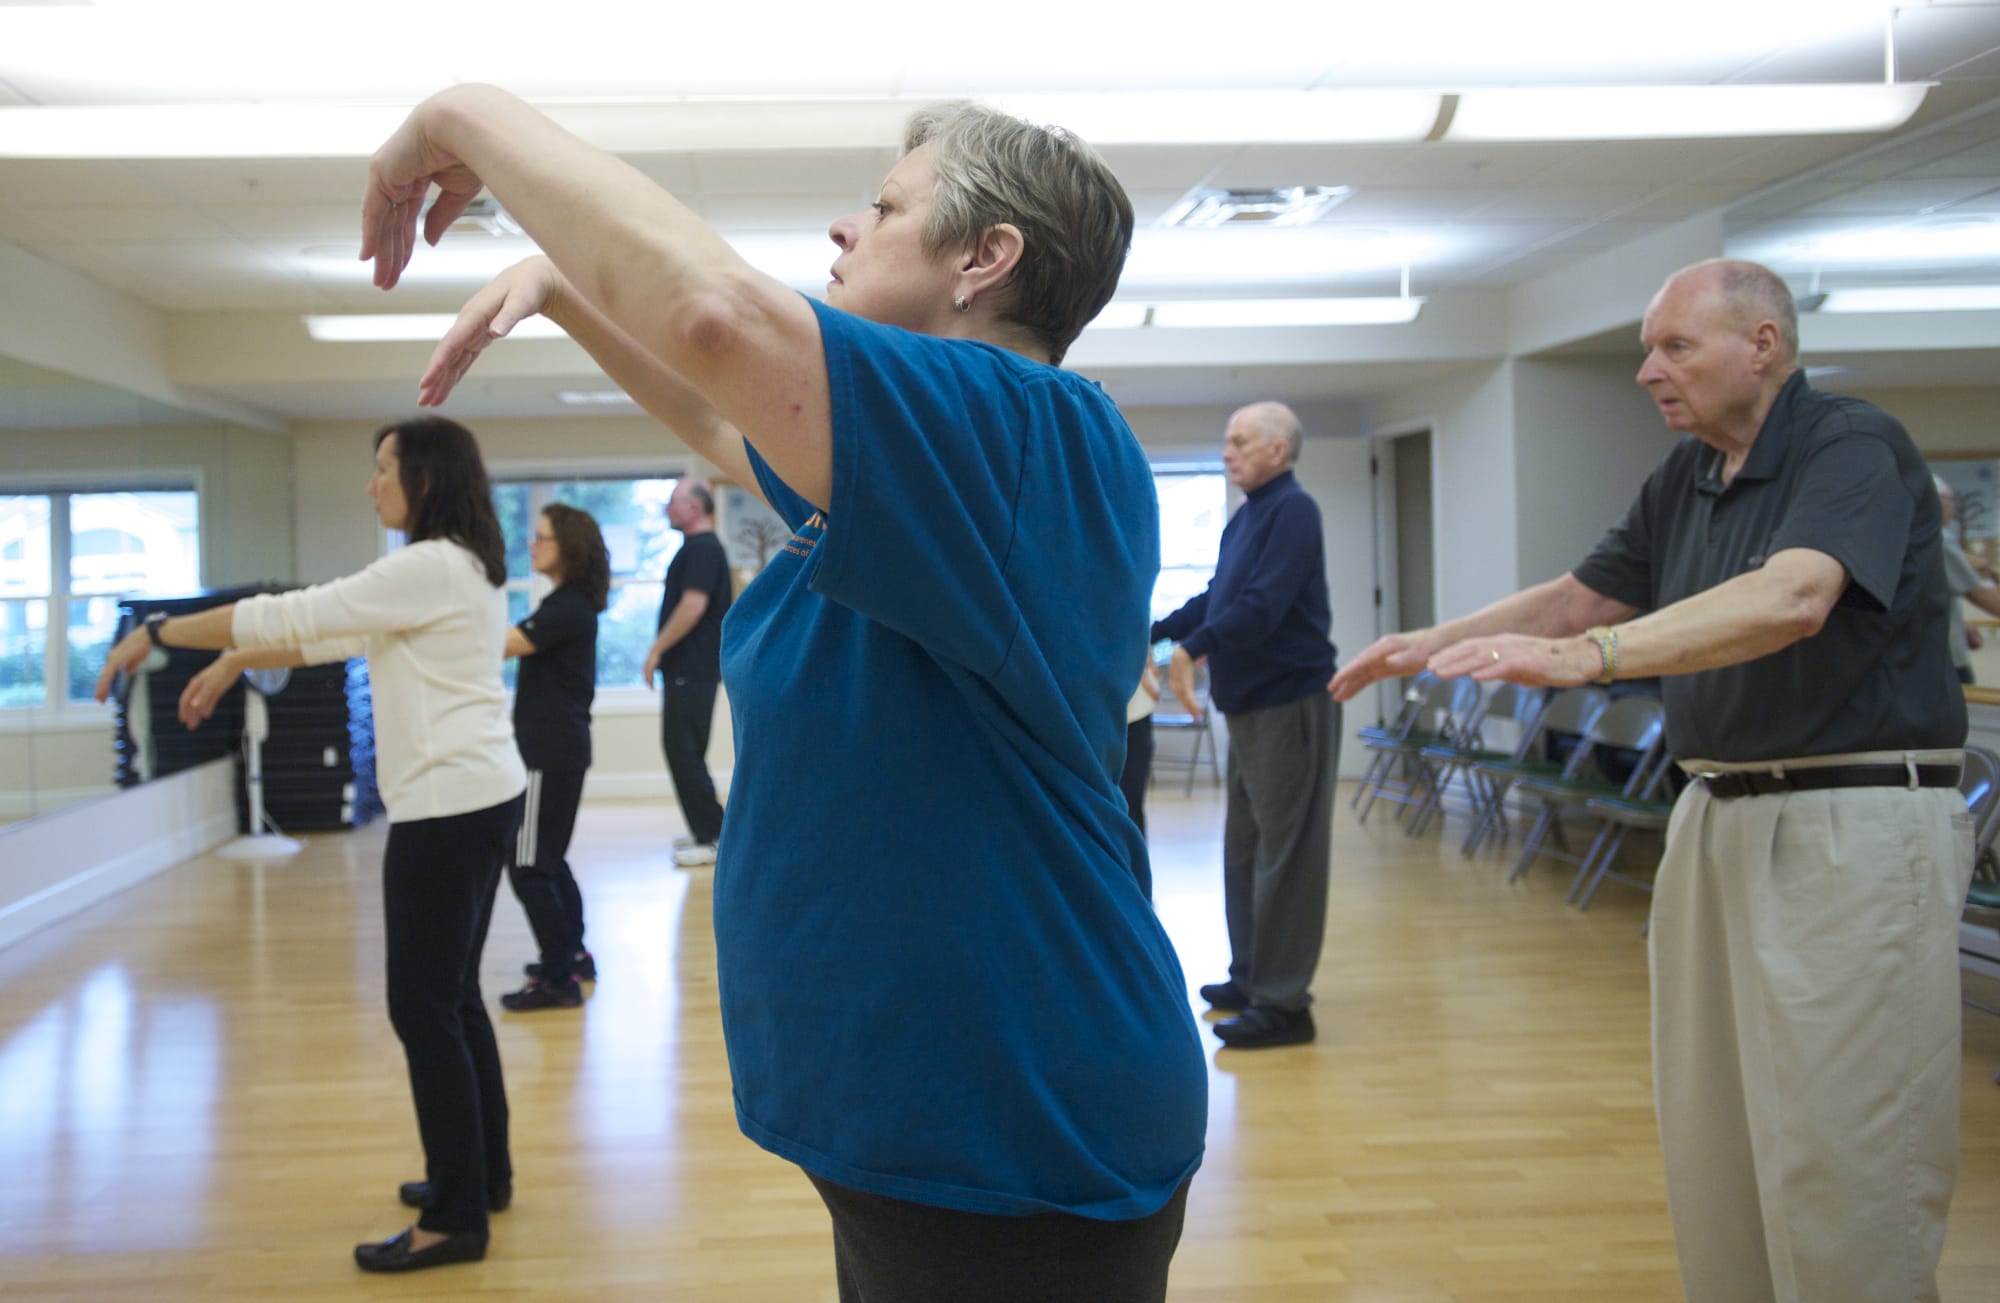 Linda McKenzie, 65, participates in a Tai Chi class for seniors at Touchmark at Fairway Village in Vancouver.